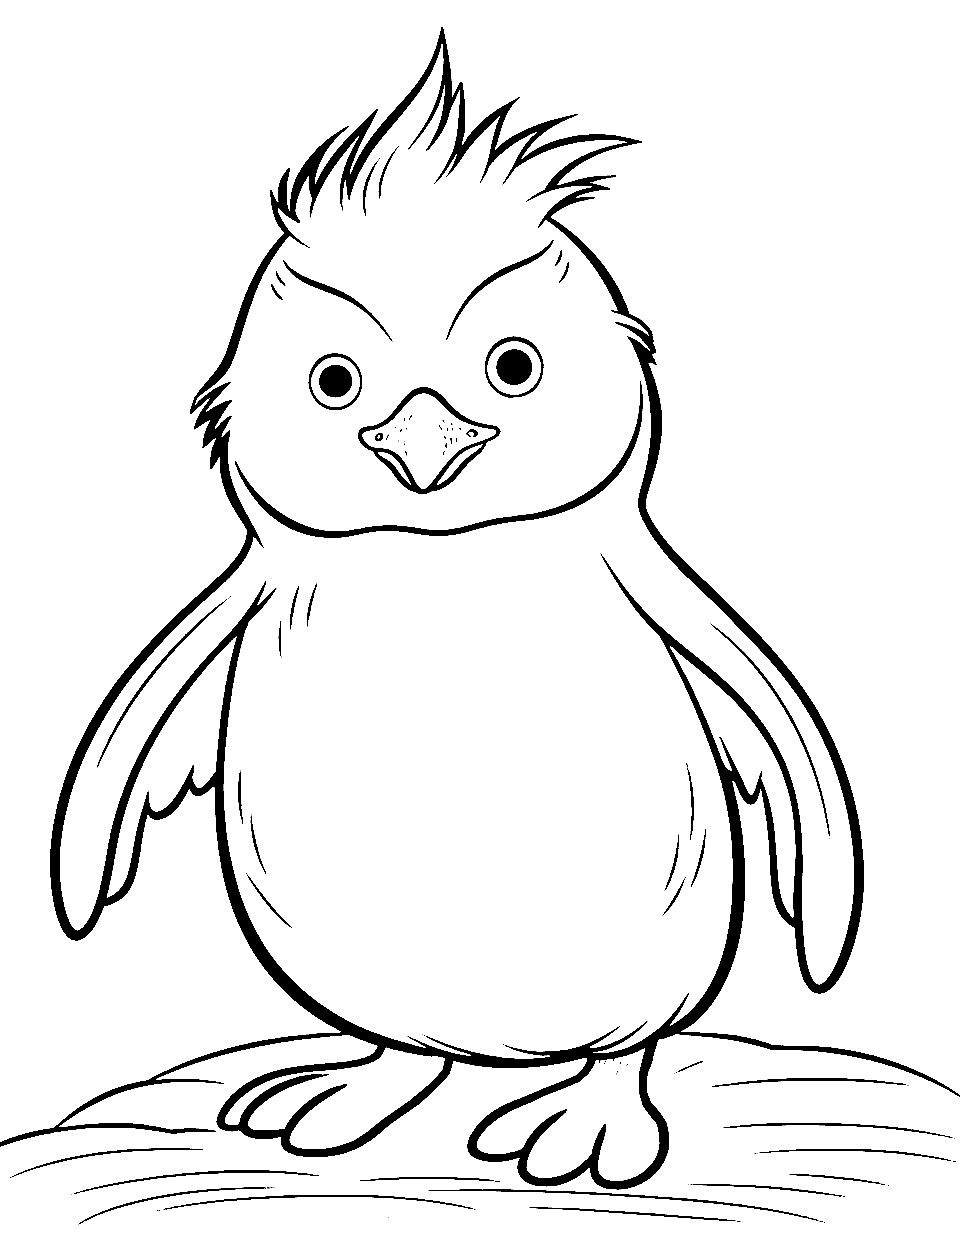 Distinct Rockhopper Penguin Coloring Page - A penguin with characteristic rocky eyebrows and a fierce look.